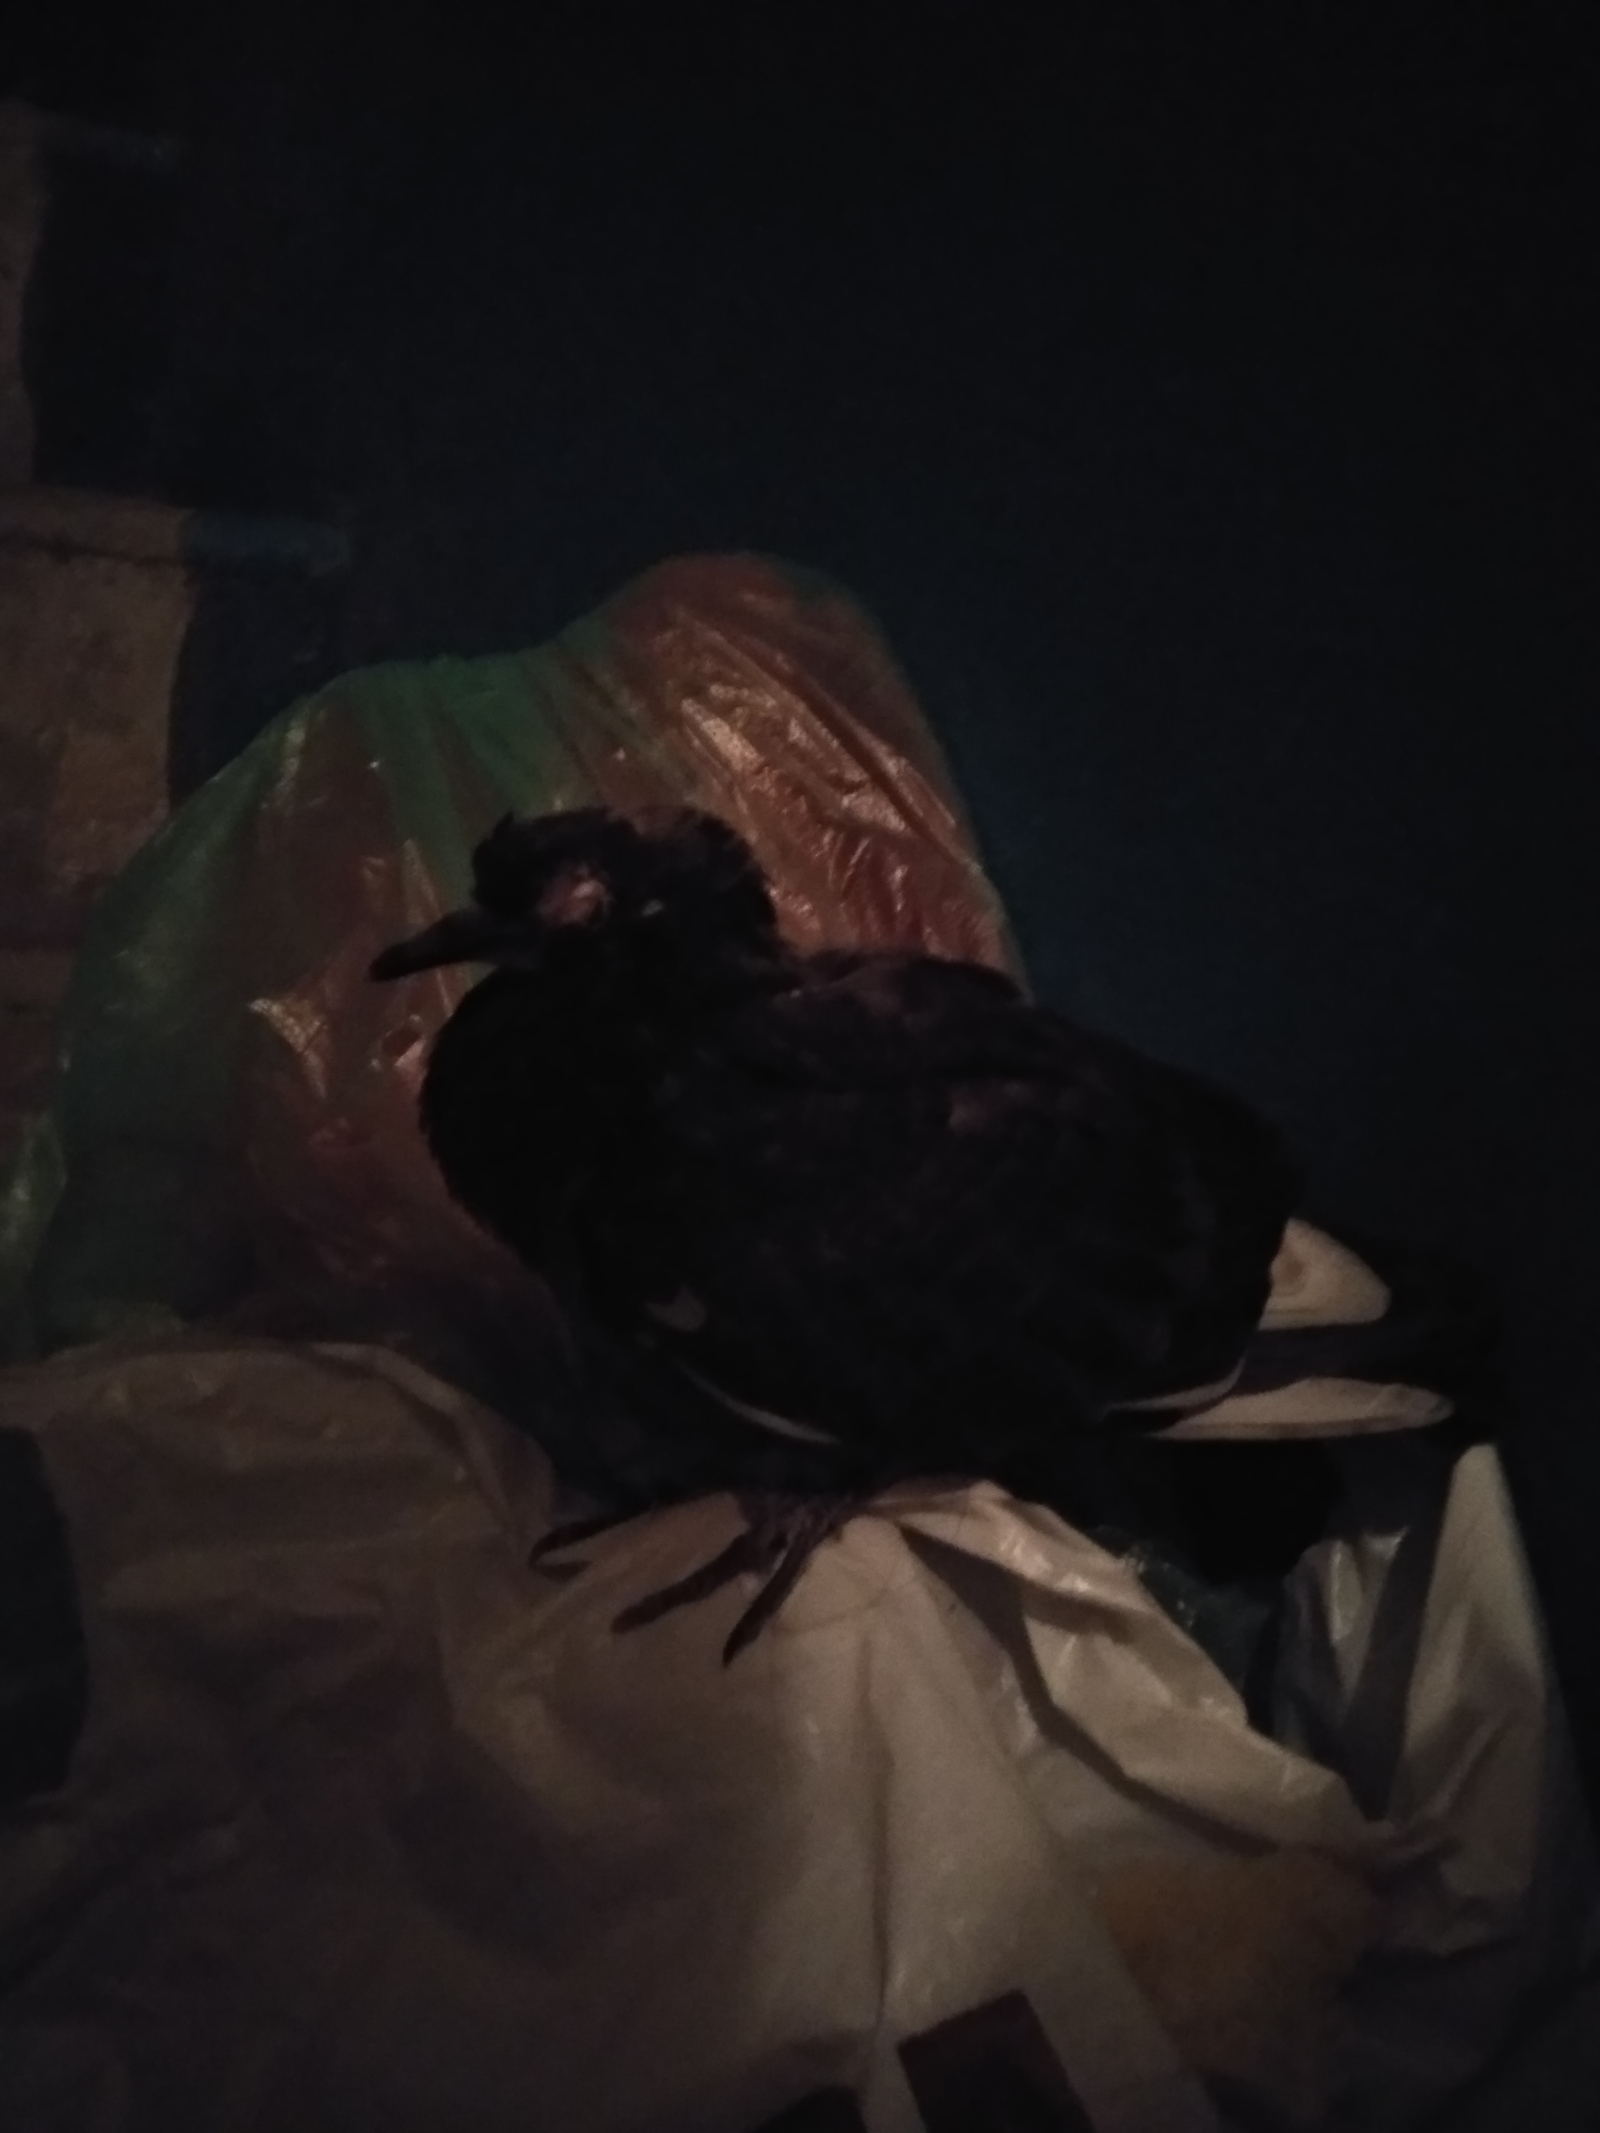 Here is such a poor fellow sitting in the entrance. One eye is missing, he is not afraid of us. How can we help him? I would not want to leave to die. Kiev - My, Lost, Birds, It's a pity, A pity